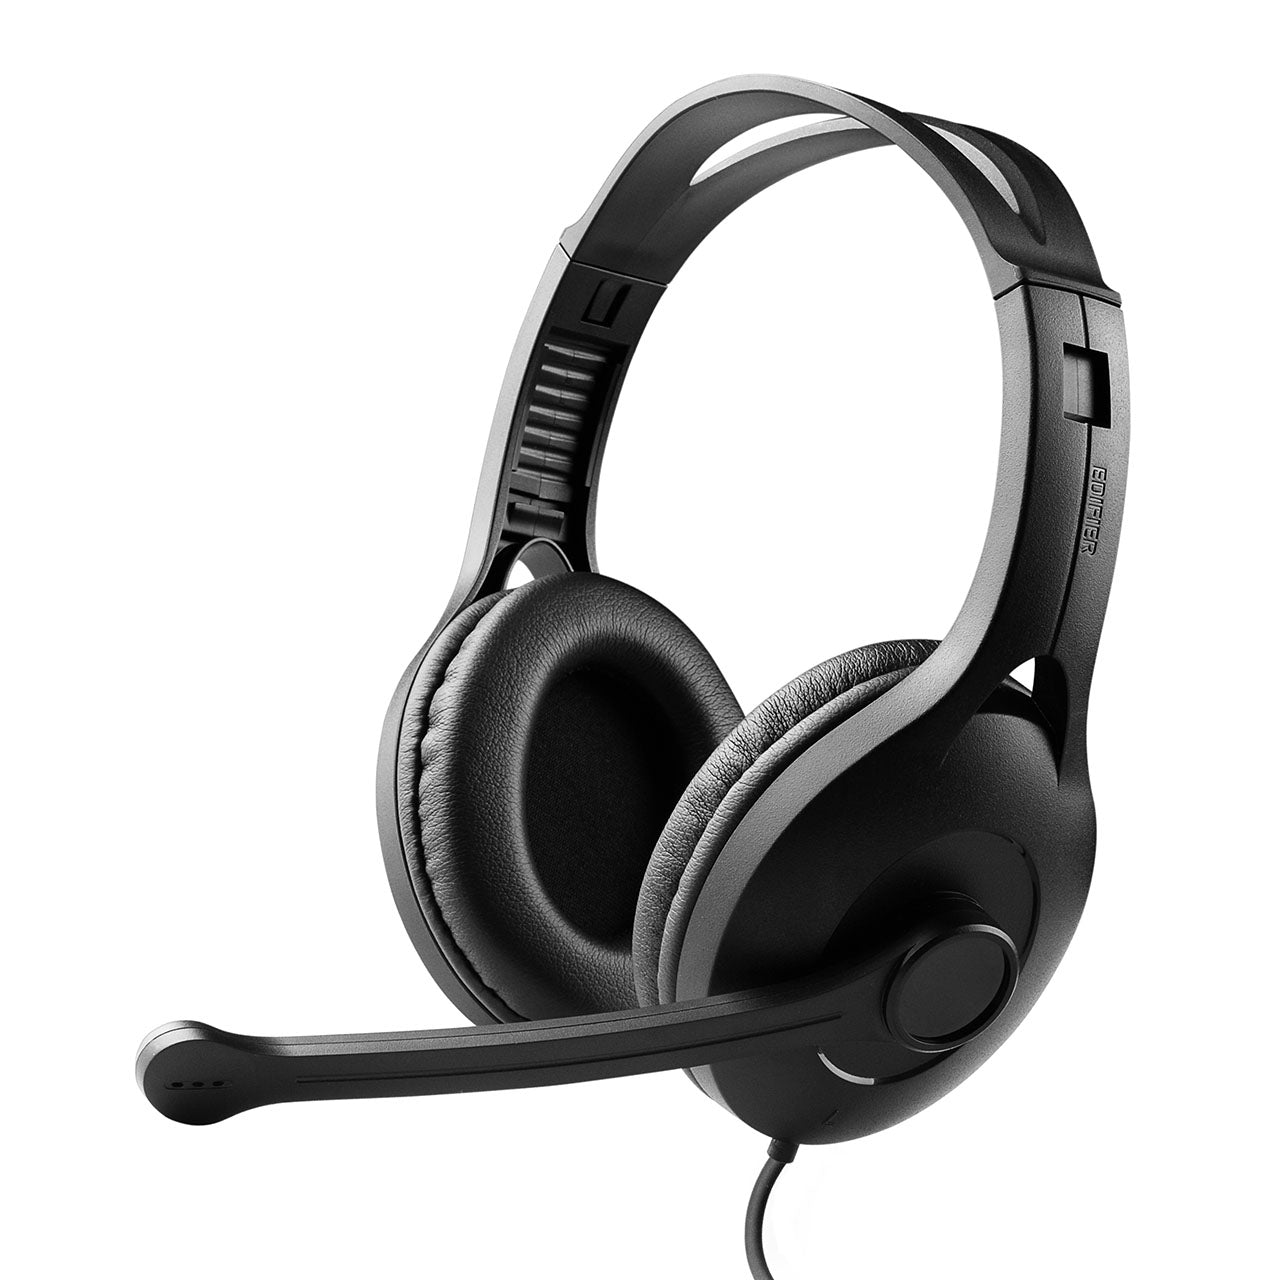 K800 USB Headset with Microphone - 120 Degree Microphone Rotation, Leather Padded Ear Cups, Volume/Mute Control - Ideal for Gaming, Business